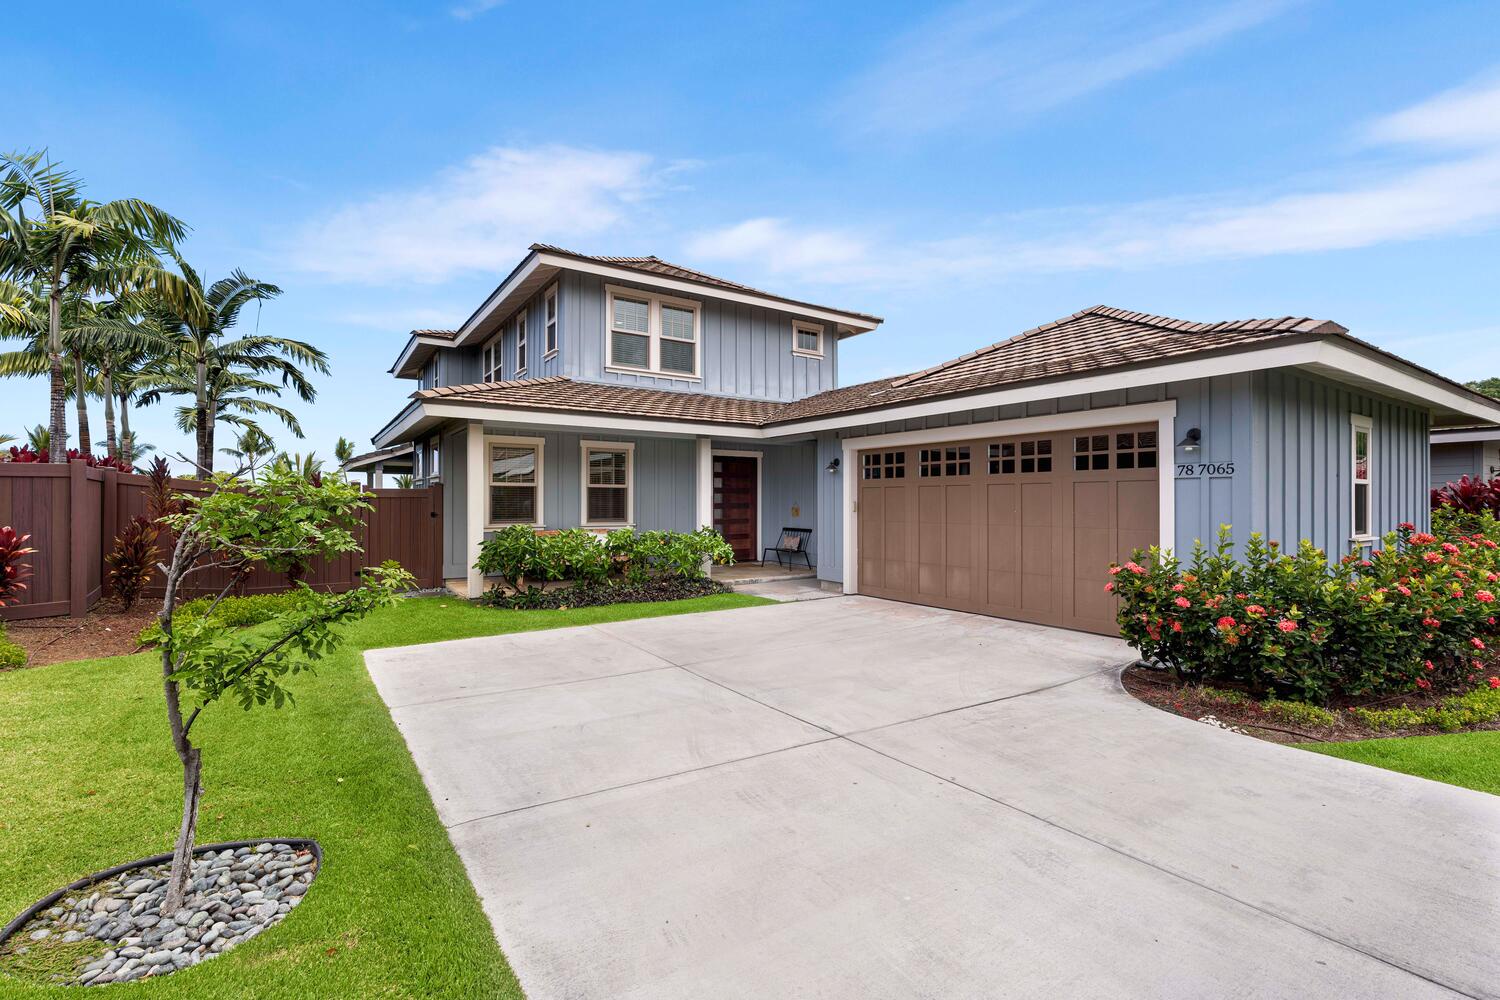 Kailua-Kona Vacation Rentals, Holua Kai #26 - A well-appointed two-story family home featuring a spacious driveway and manicured landscaping, under a clear blue sky.